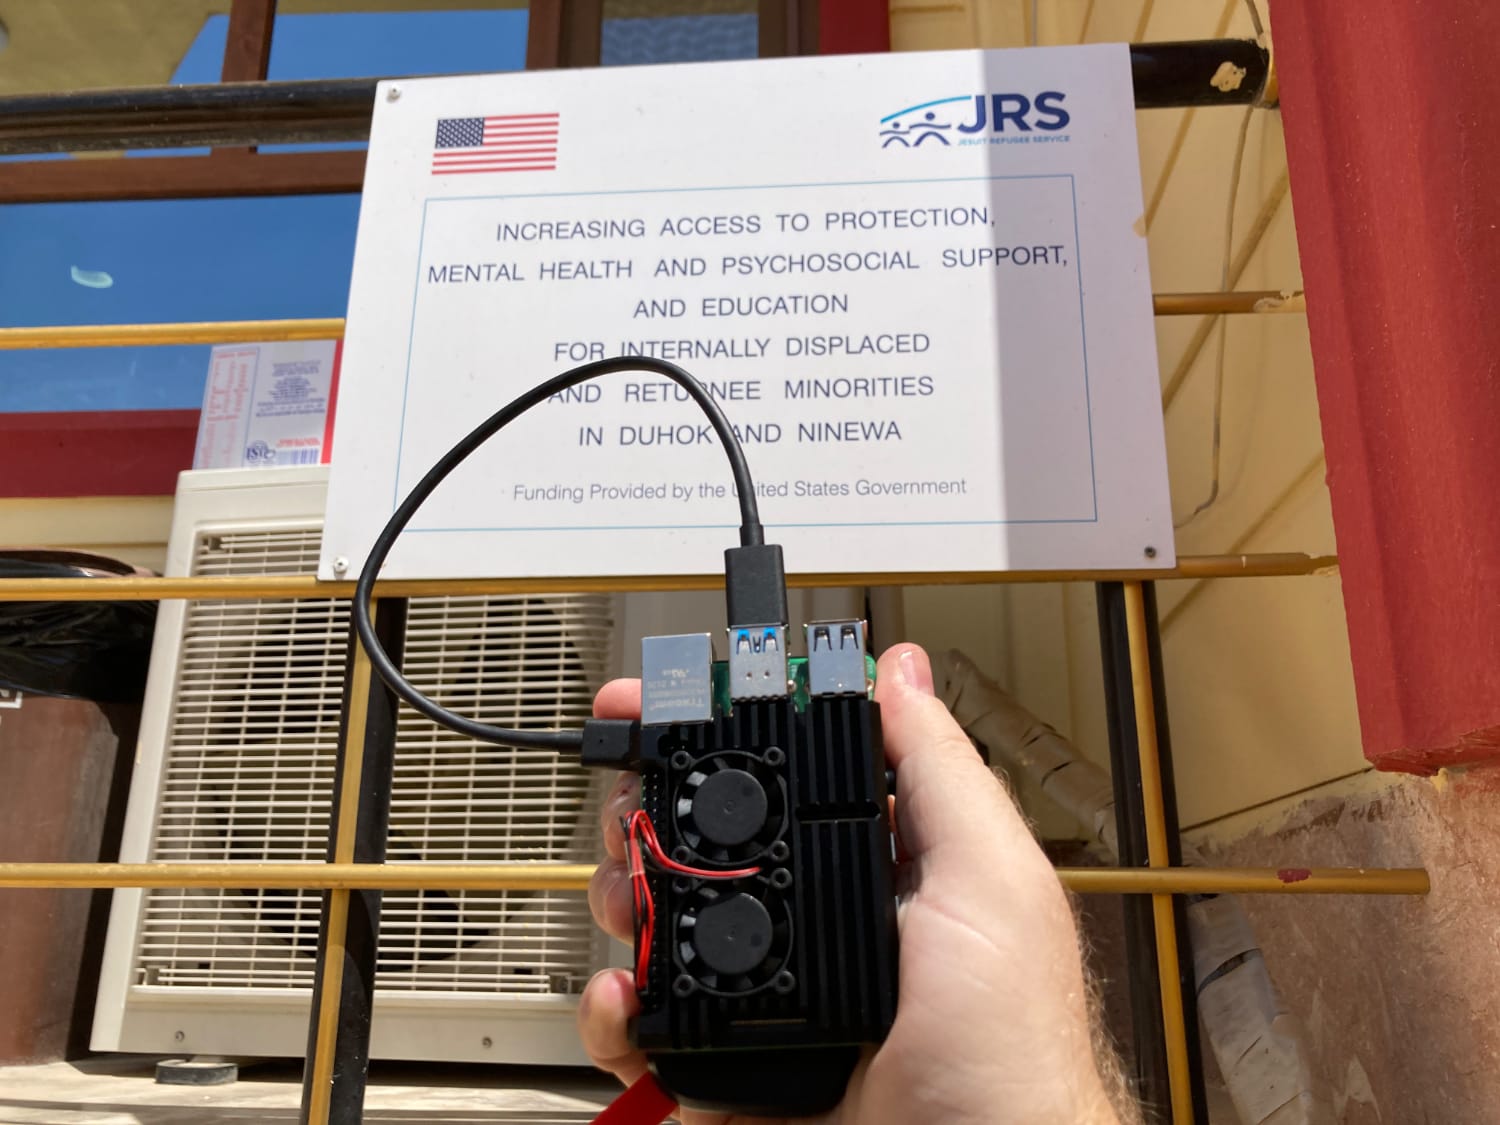 An assembled IIAB unit being held in front of a sign for the JRS Duhok office; the sign explains the mission and funding of the project there